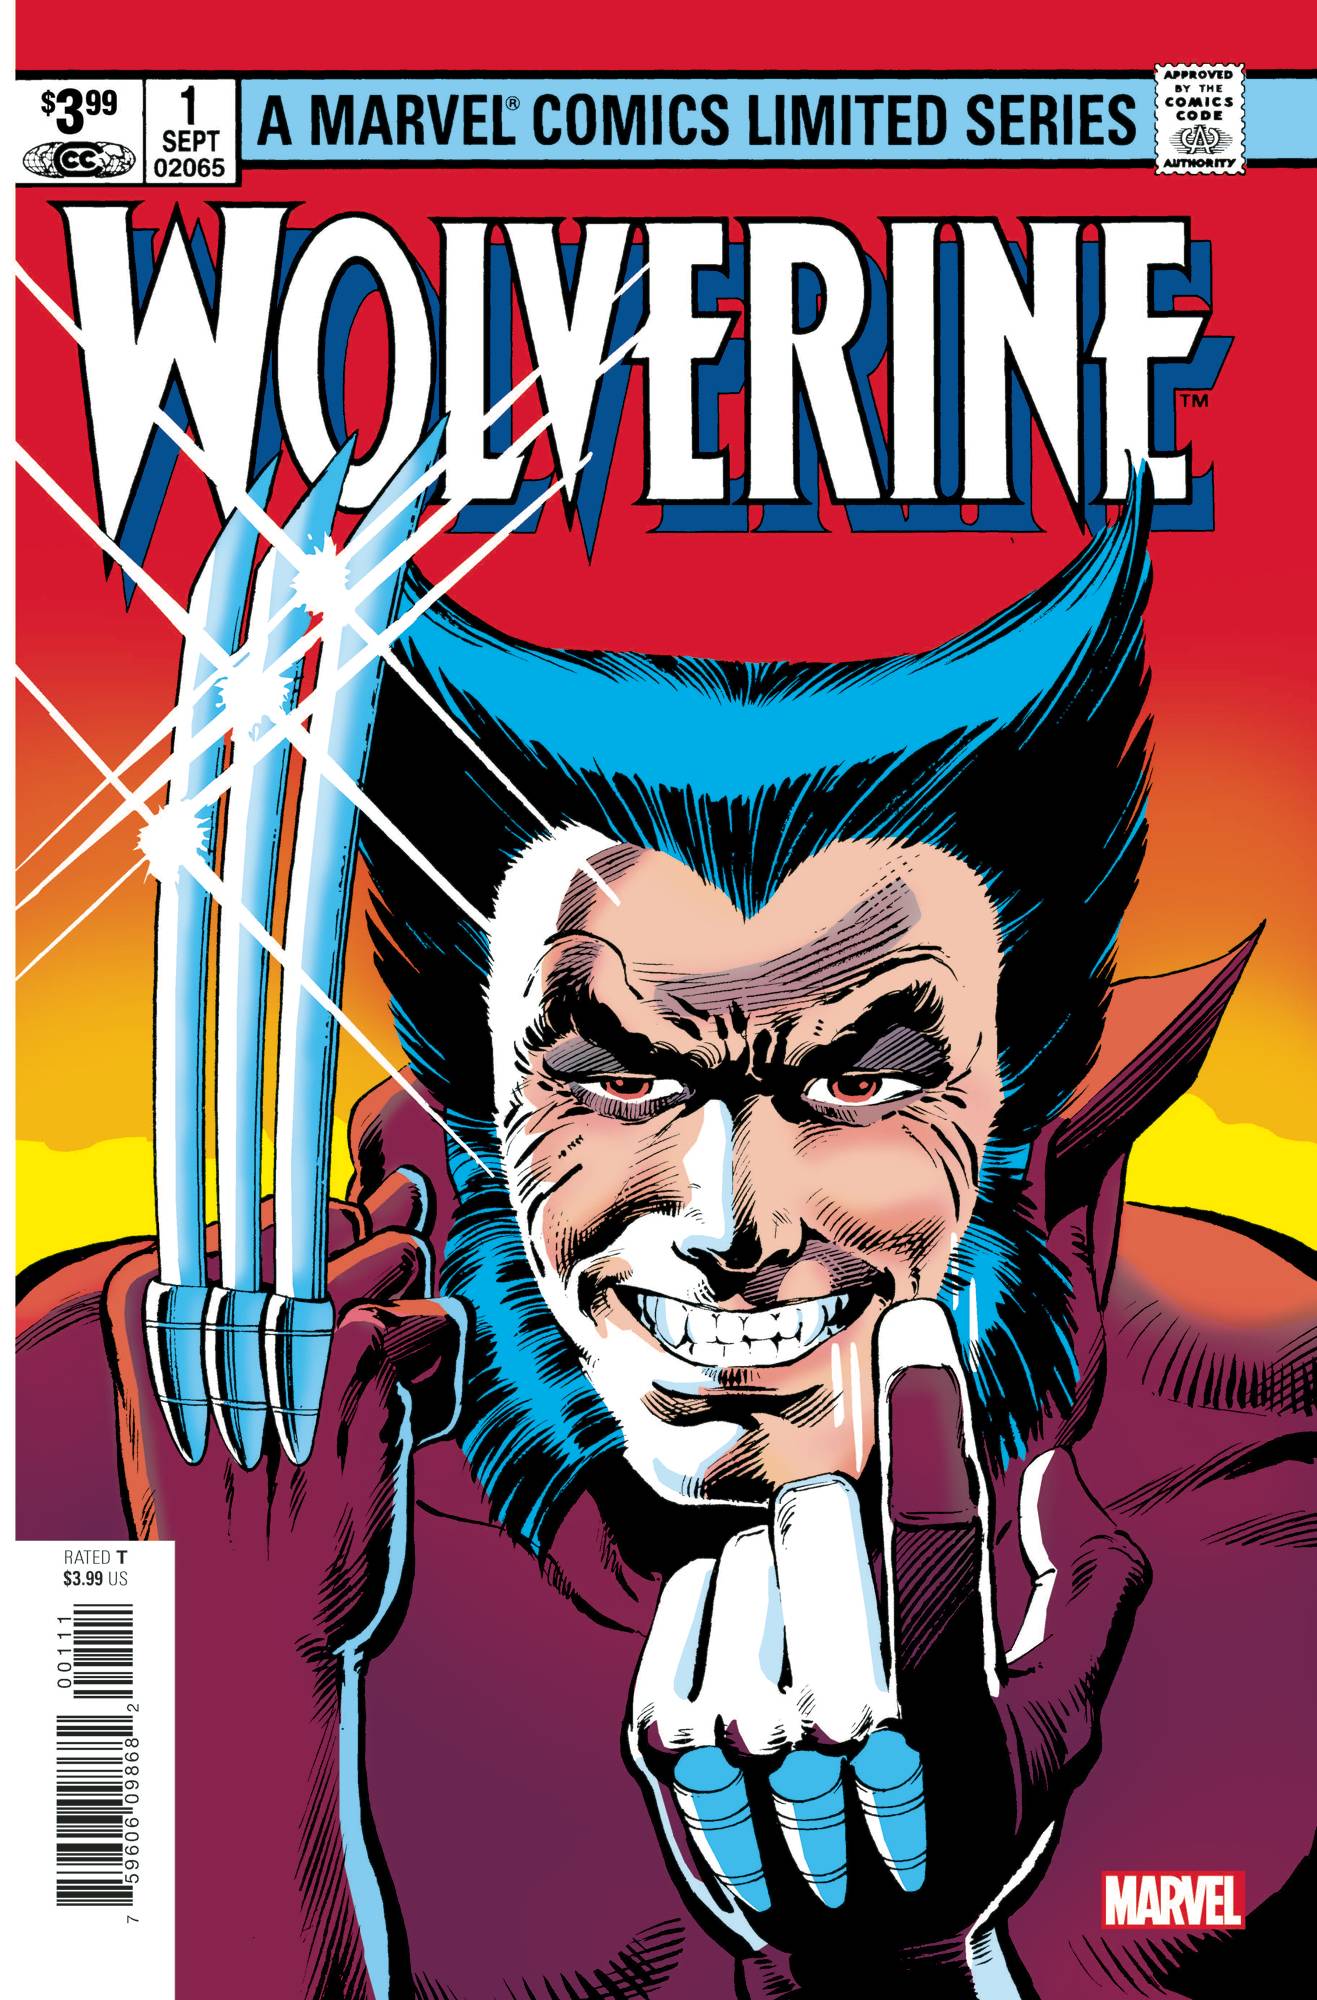 WOLVERINE BY CLAREMONT & MILLER #1 FACSIMILE EDITION